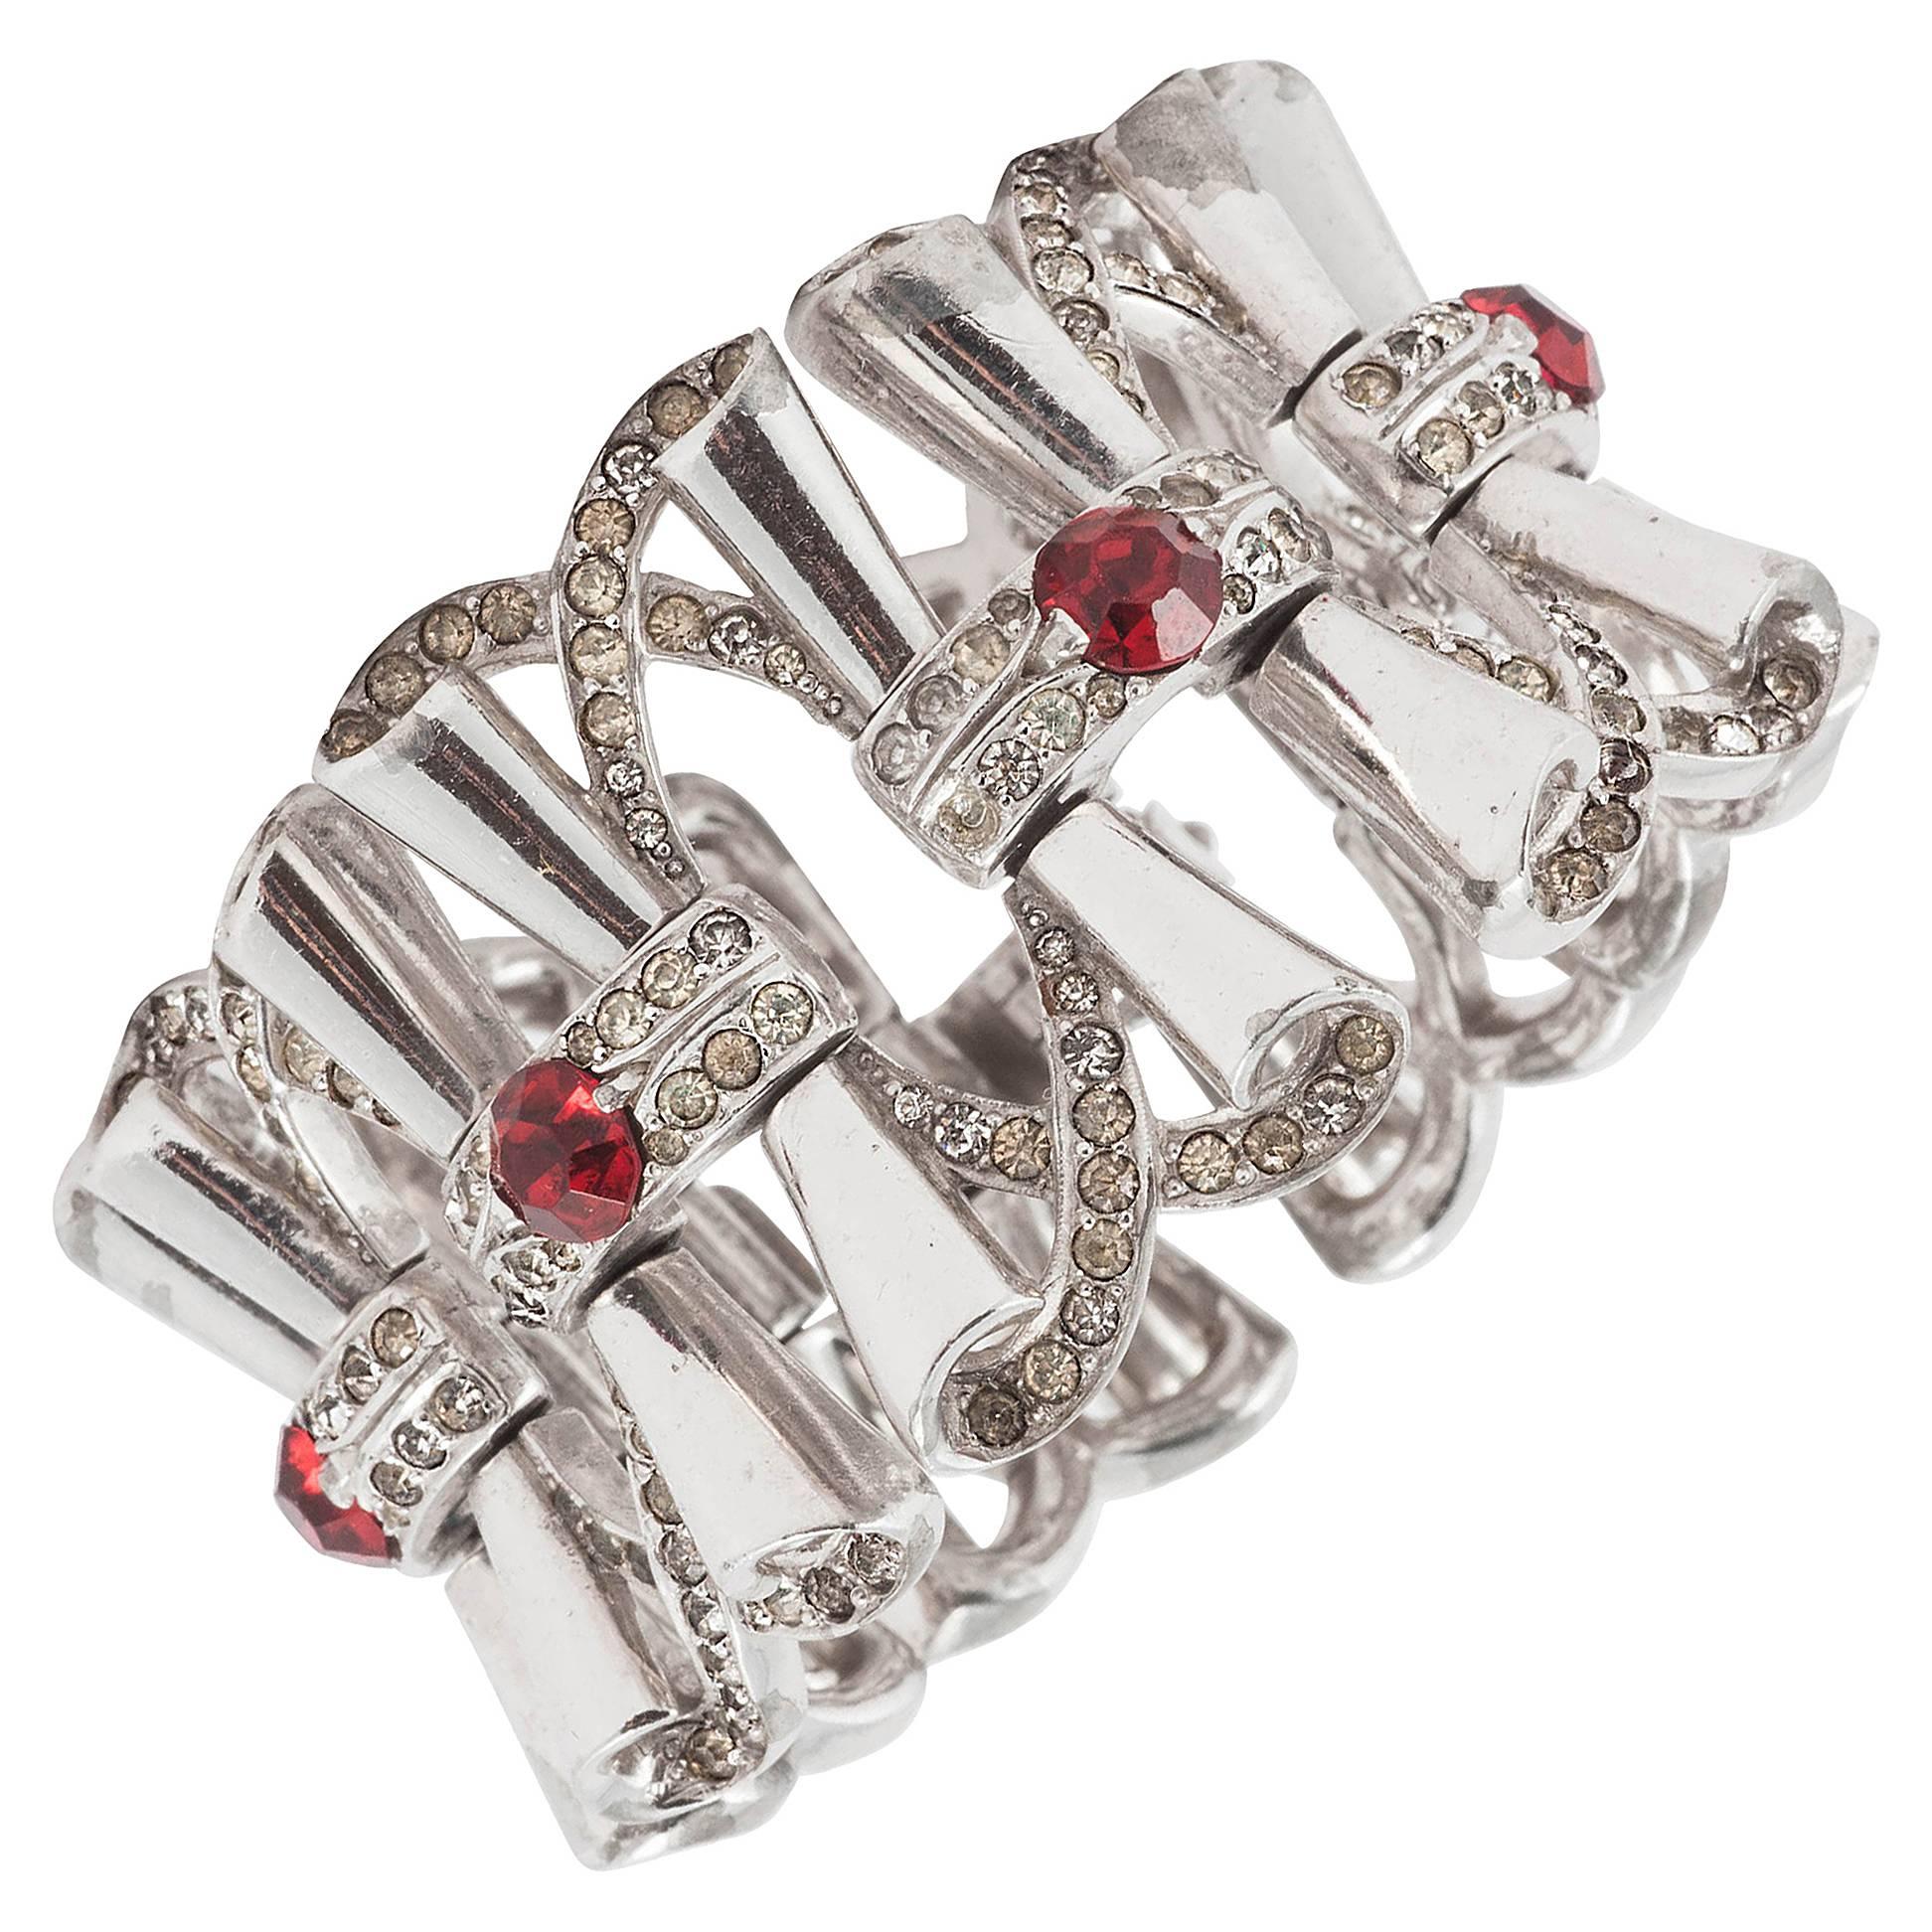 Fluid rhodium plated cocktail bracelet with clear and red paste accents, 1950s